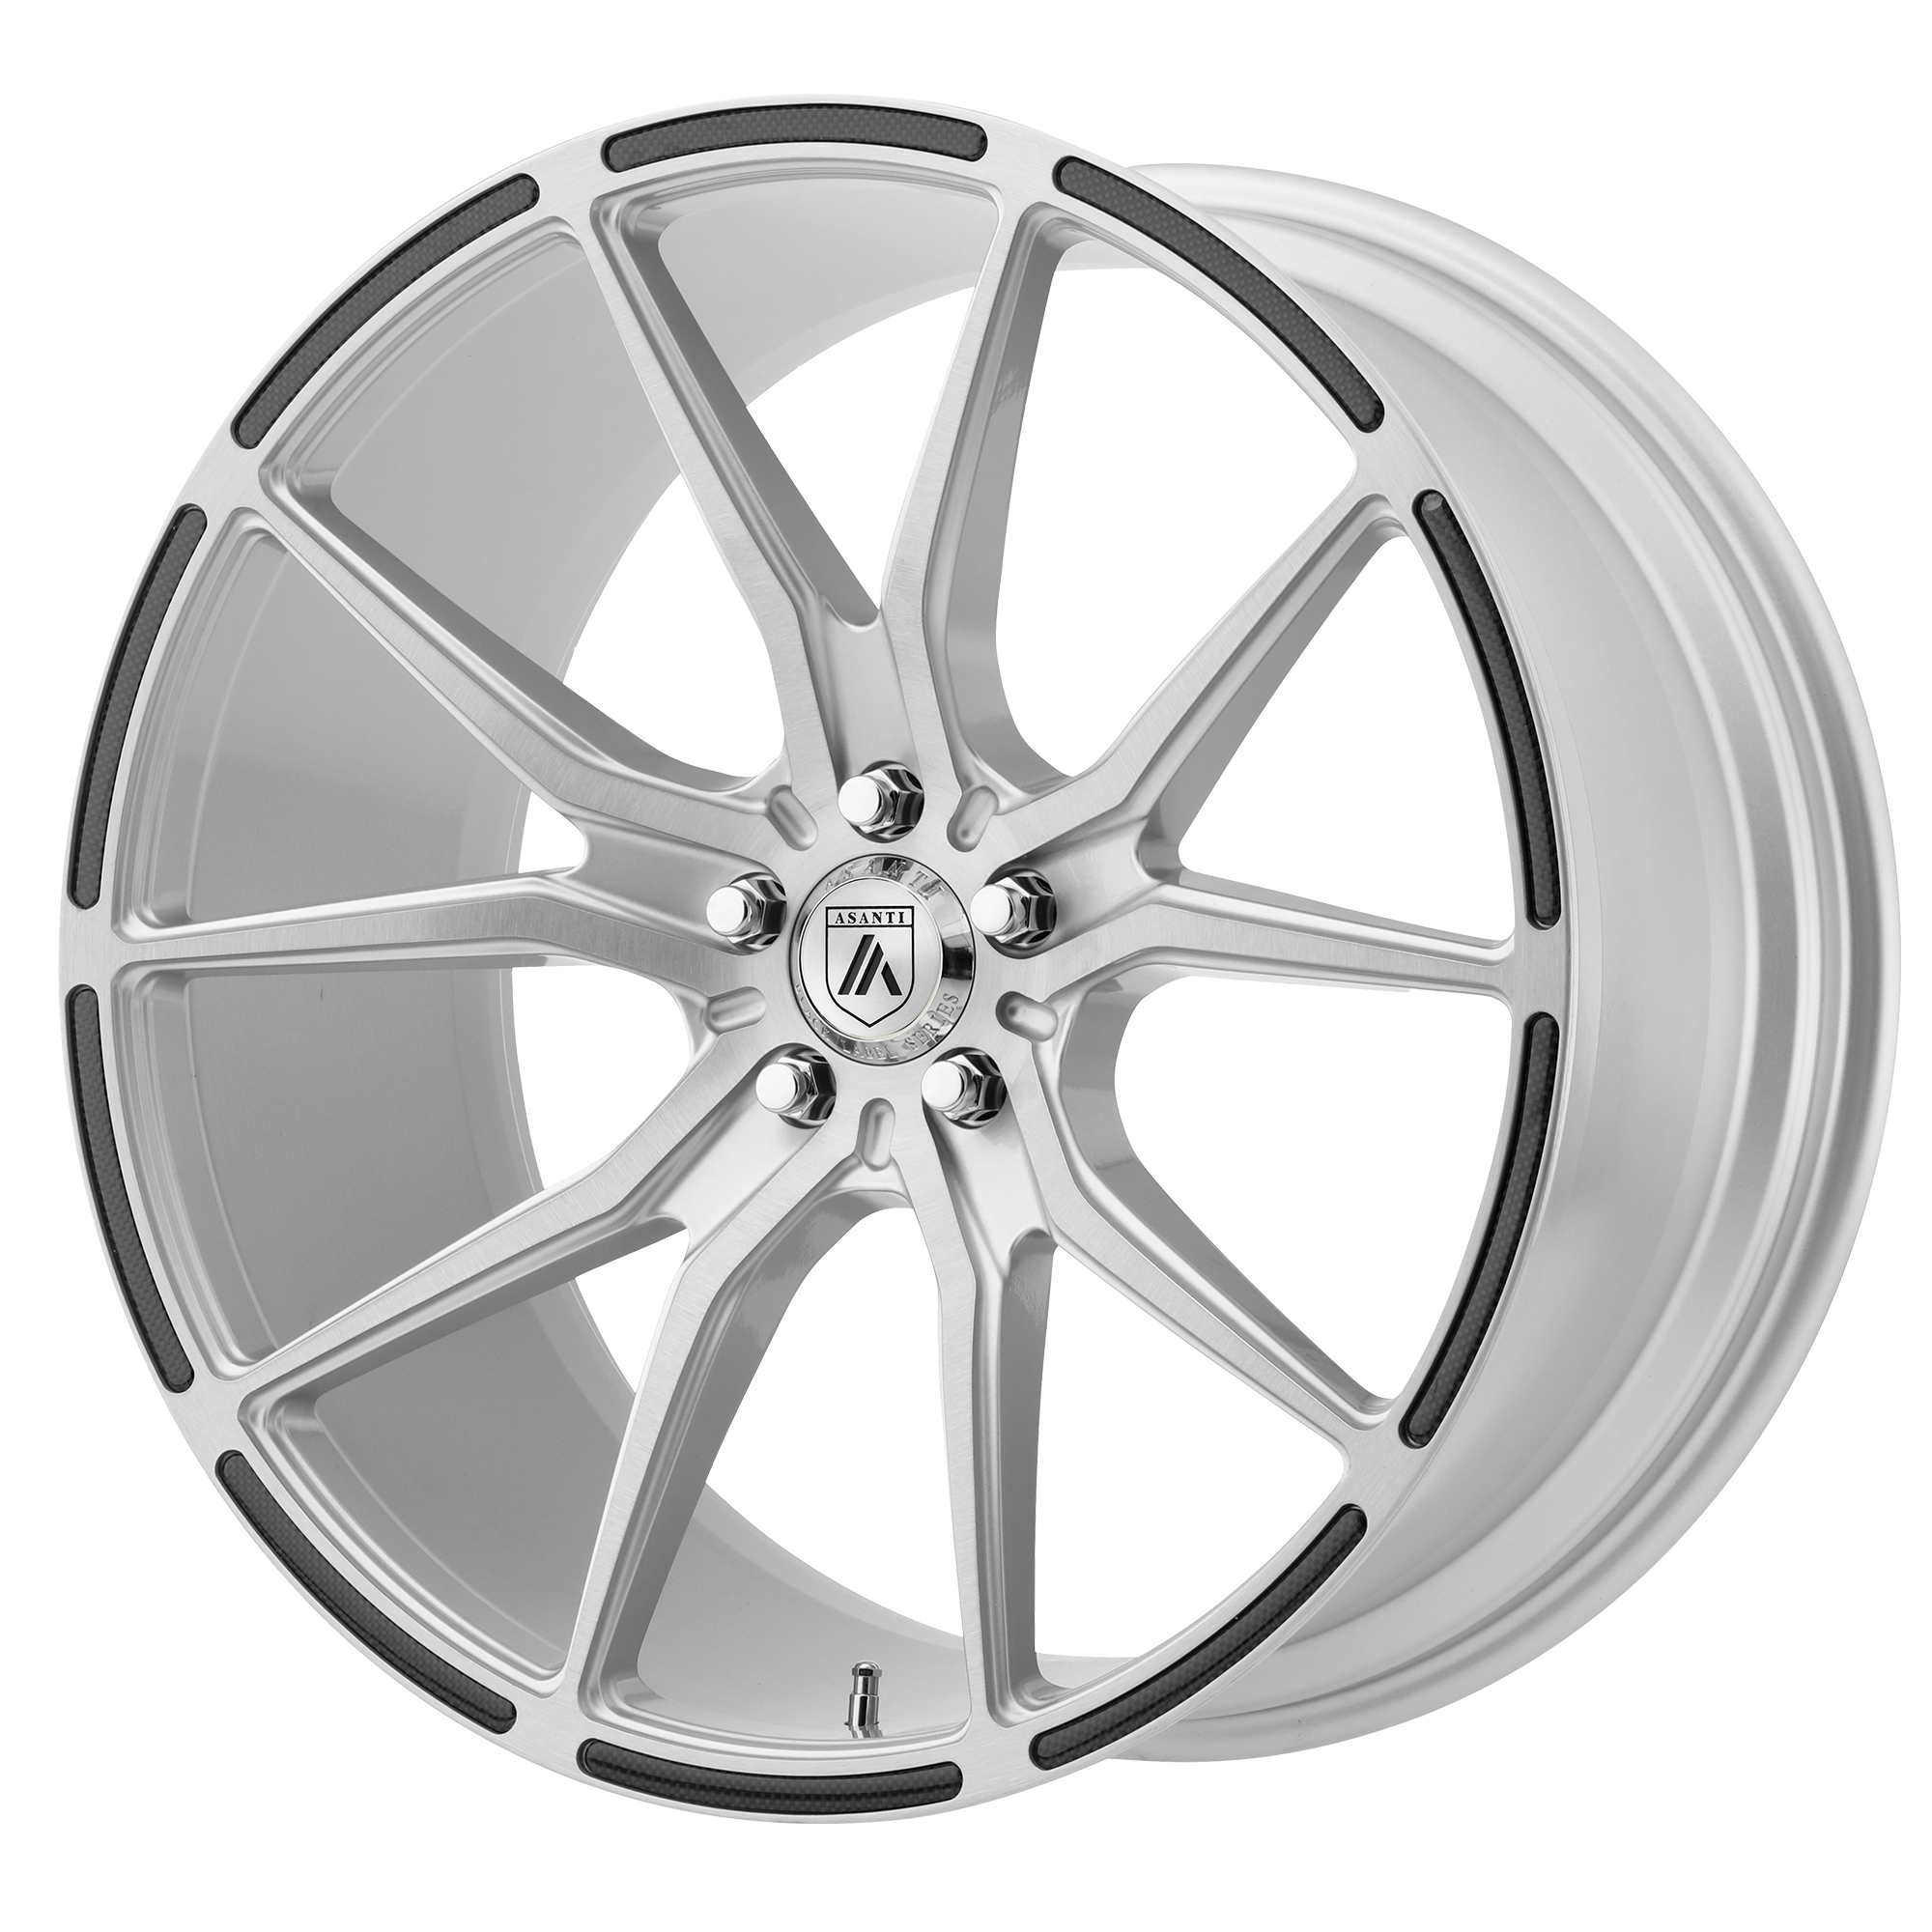 VEGA 20x9 Blank BRUSHED SILVER W/ CARBON FIBER INSERTS (15.00 - 34.00 mm) - Tires and Engine Performance